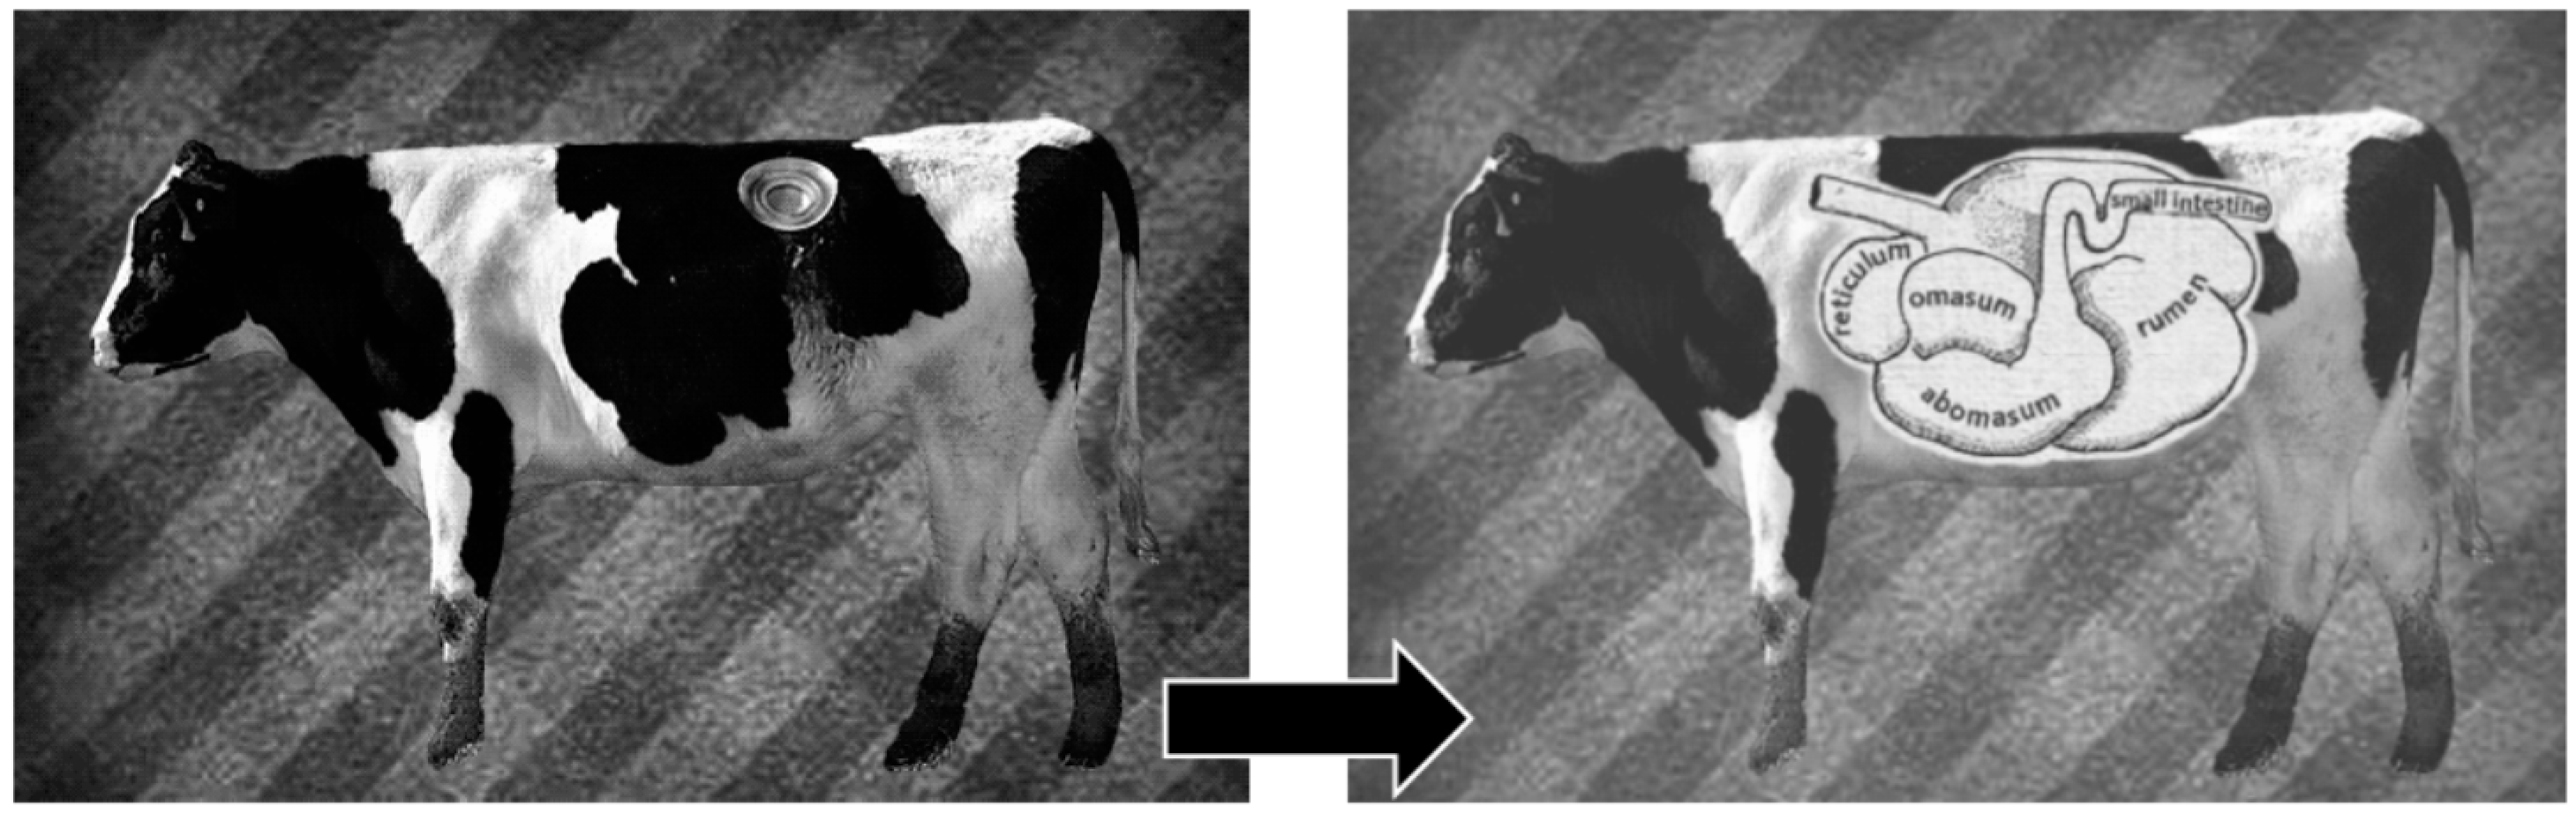 Animals | Free Full-Text | Ruminal Fistulation and Cannulation: A Necessary  Procedure for the Advancement of Biotechnological Research in Ruminants